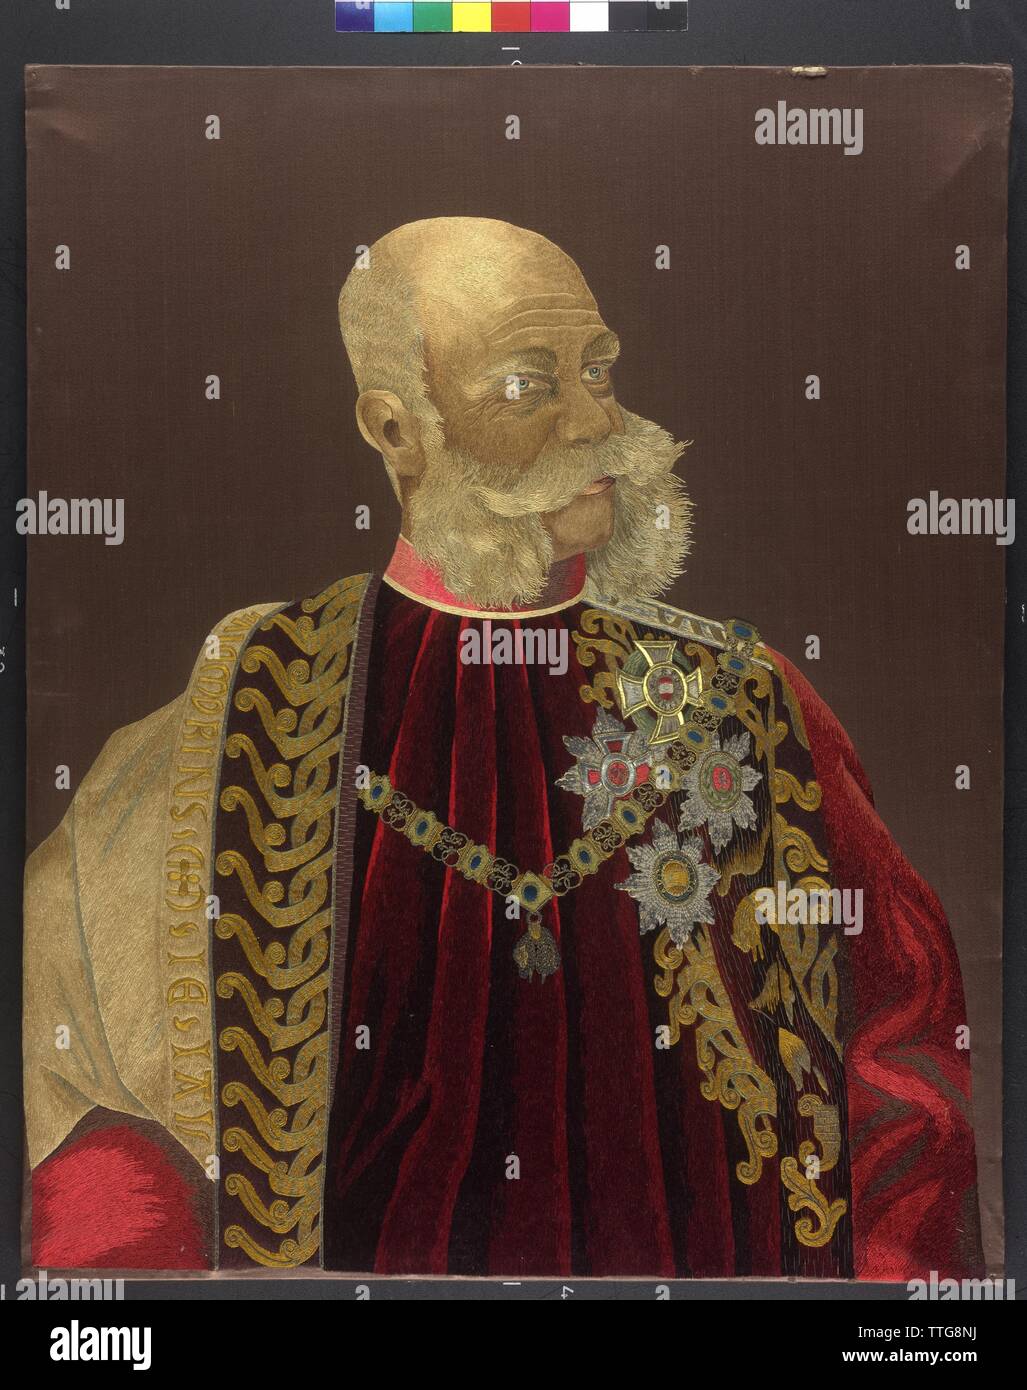 Franz Joseph I, Emperor of Austria, picture in the ceremonial coat of the grandmaster of the Order (Toison-Ornat) of The Golden Fleece. silk embroidery, Additional-Rights-Clearance-Info-Not-Available Stock Photo